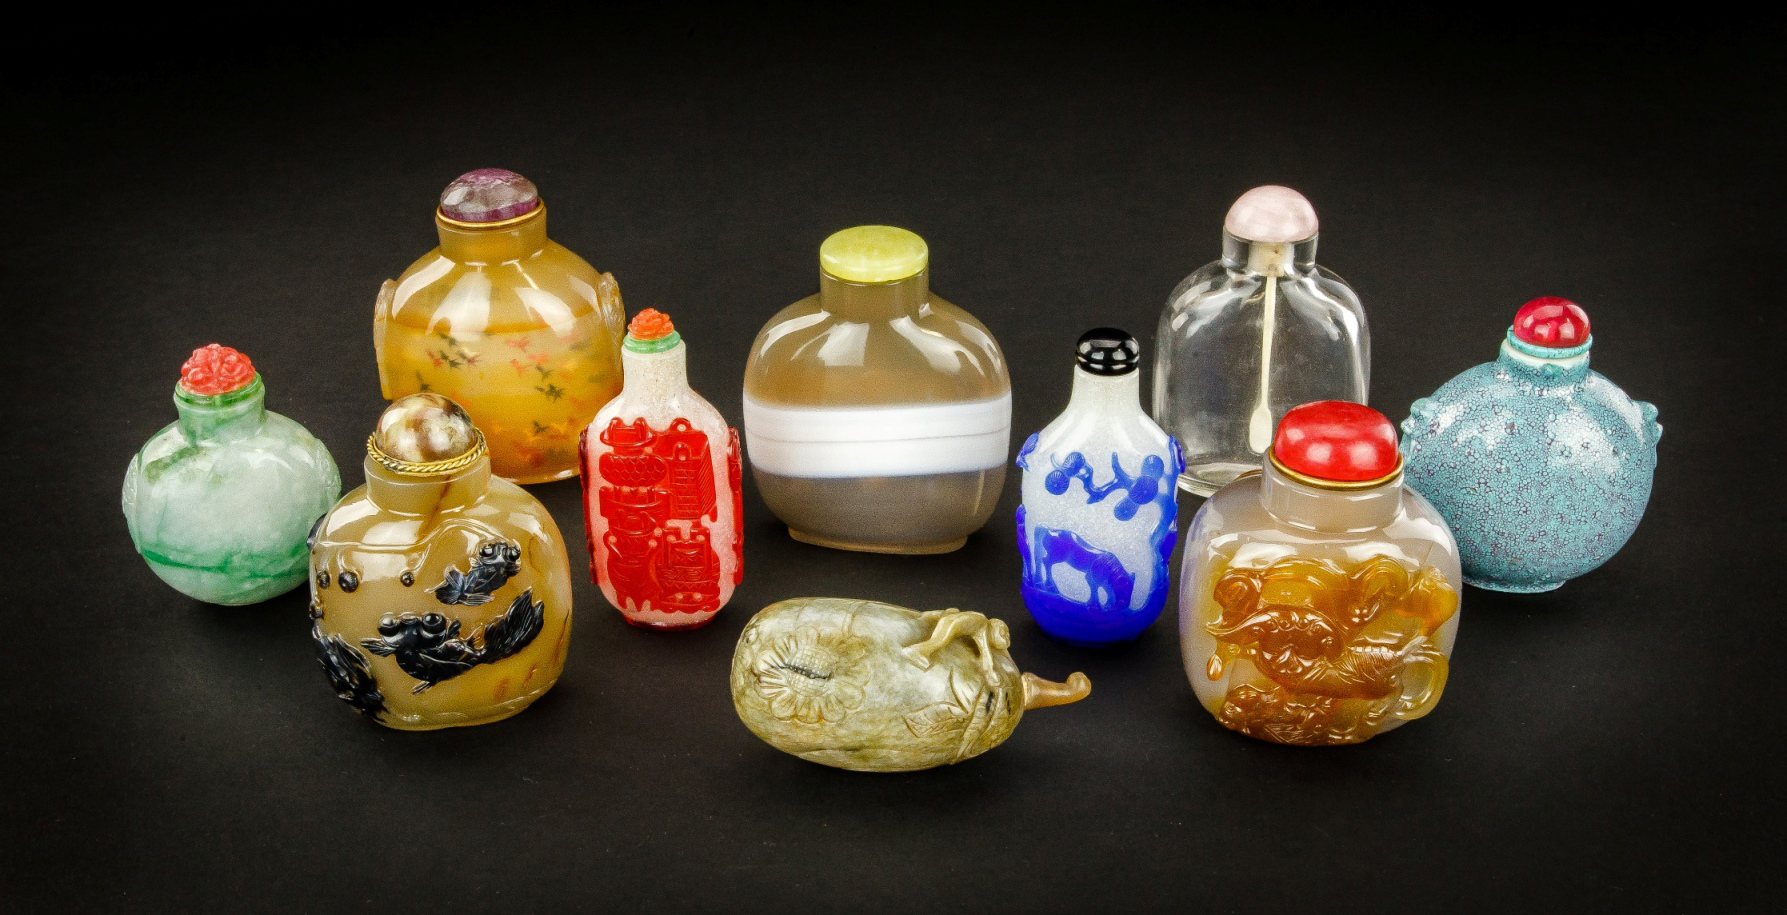 The auction will also feature a selection of 30 exquisite Chinese snuff bottles from the 18th and 19th centuries. Artingstall & Hind Auctoneers images